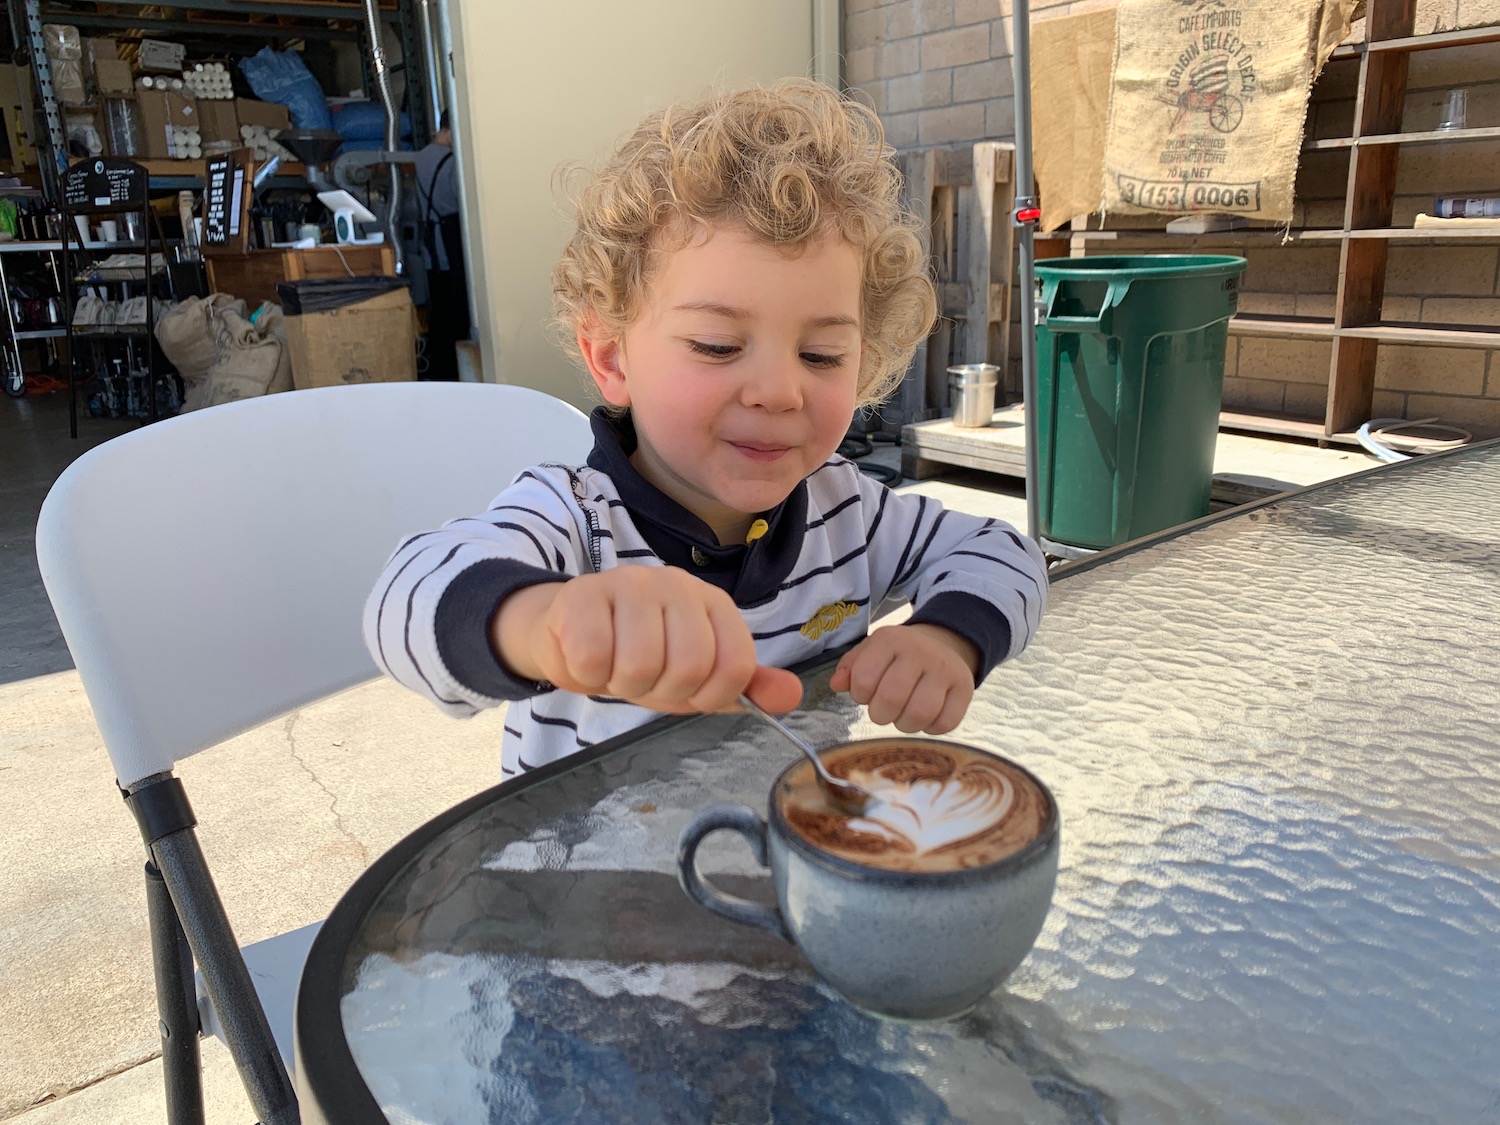 a child with curly hair and a cup of coffee